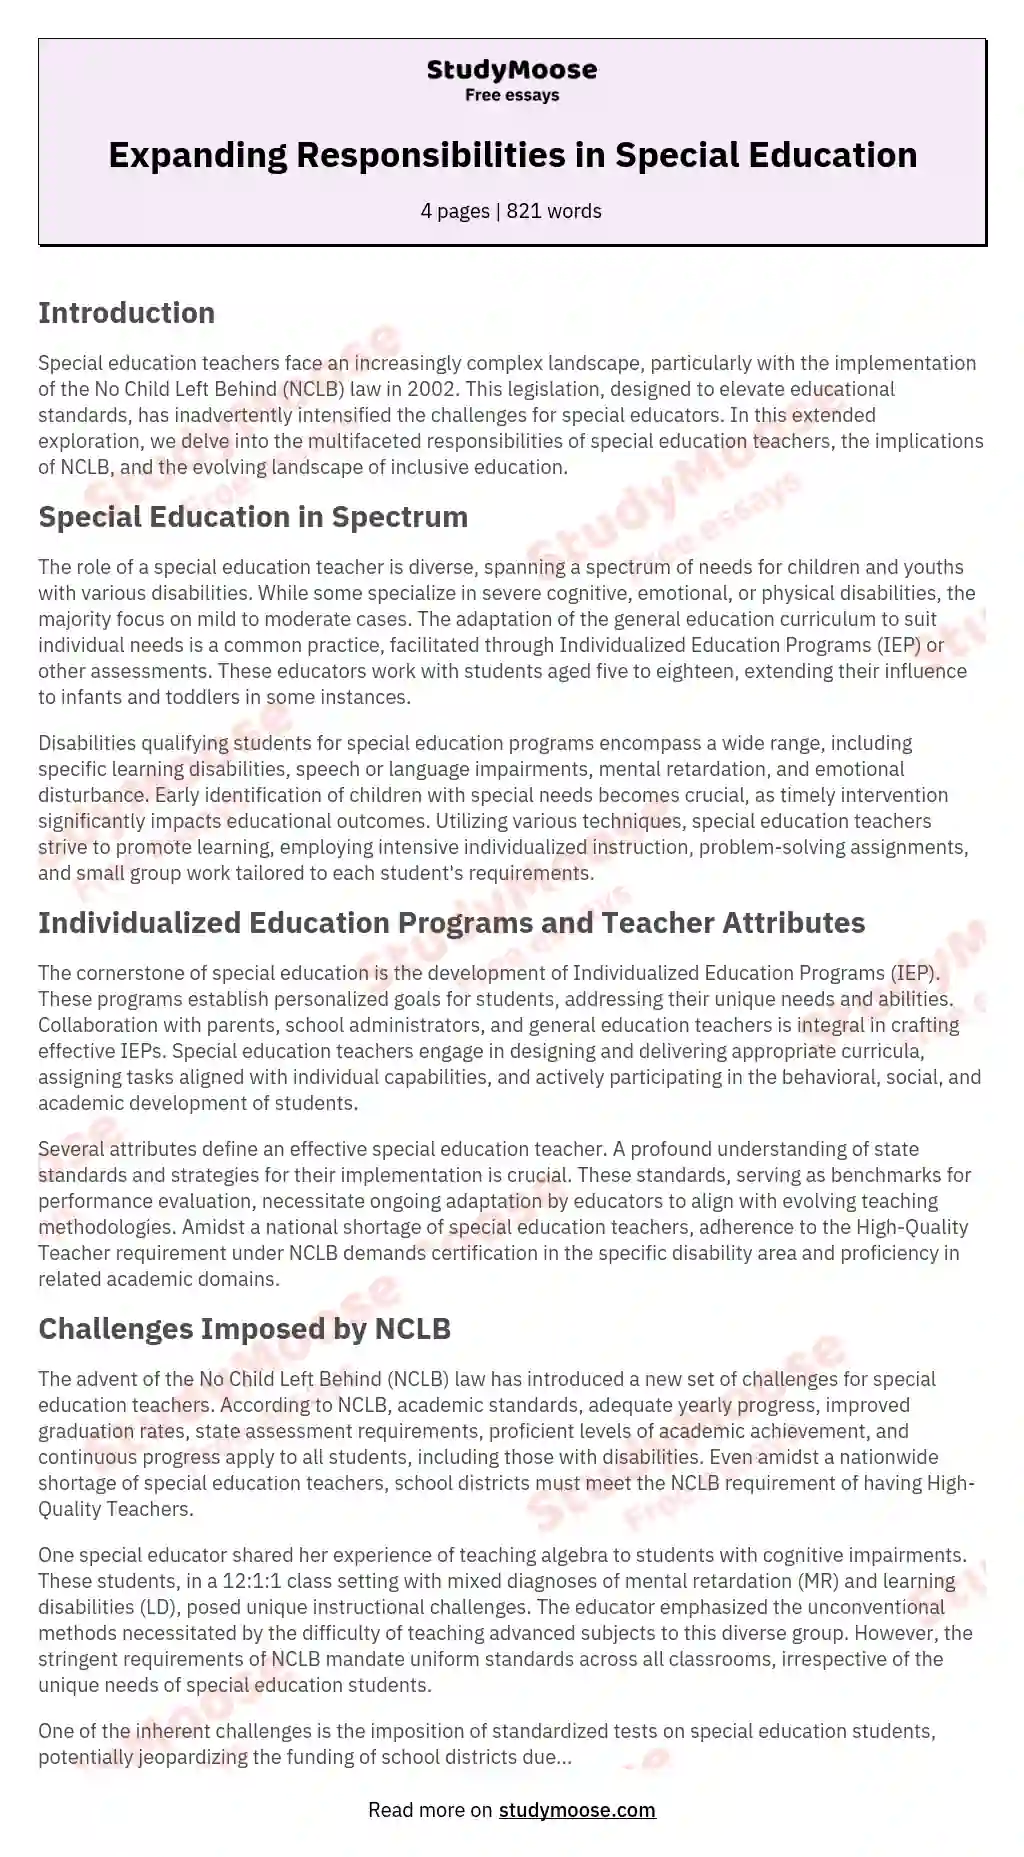 Expanding Responsibilities in Special Education essay